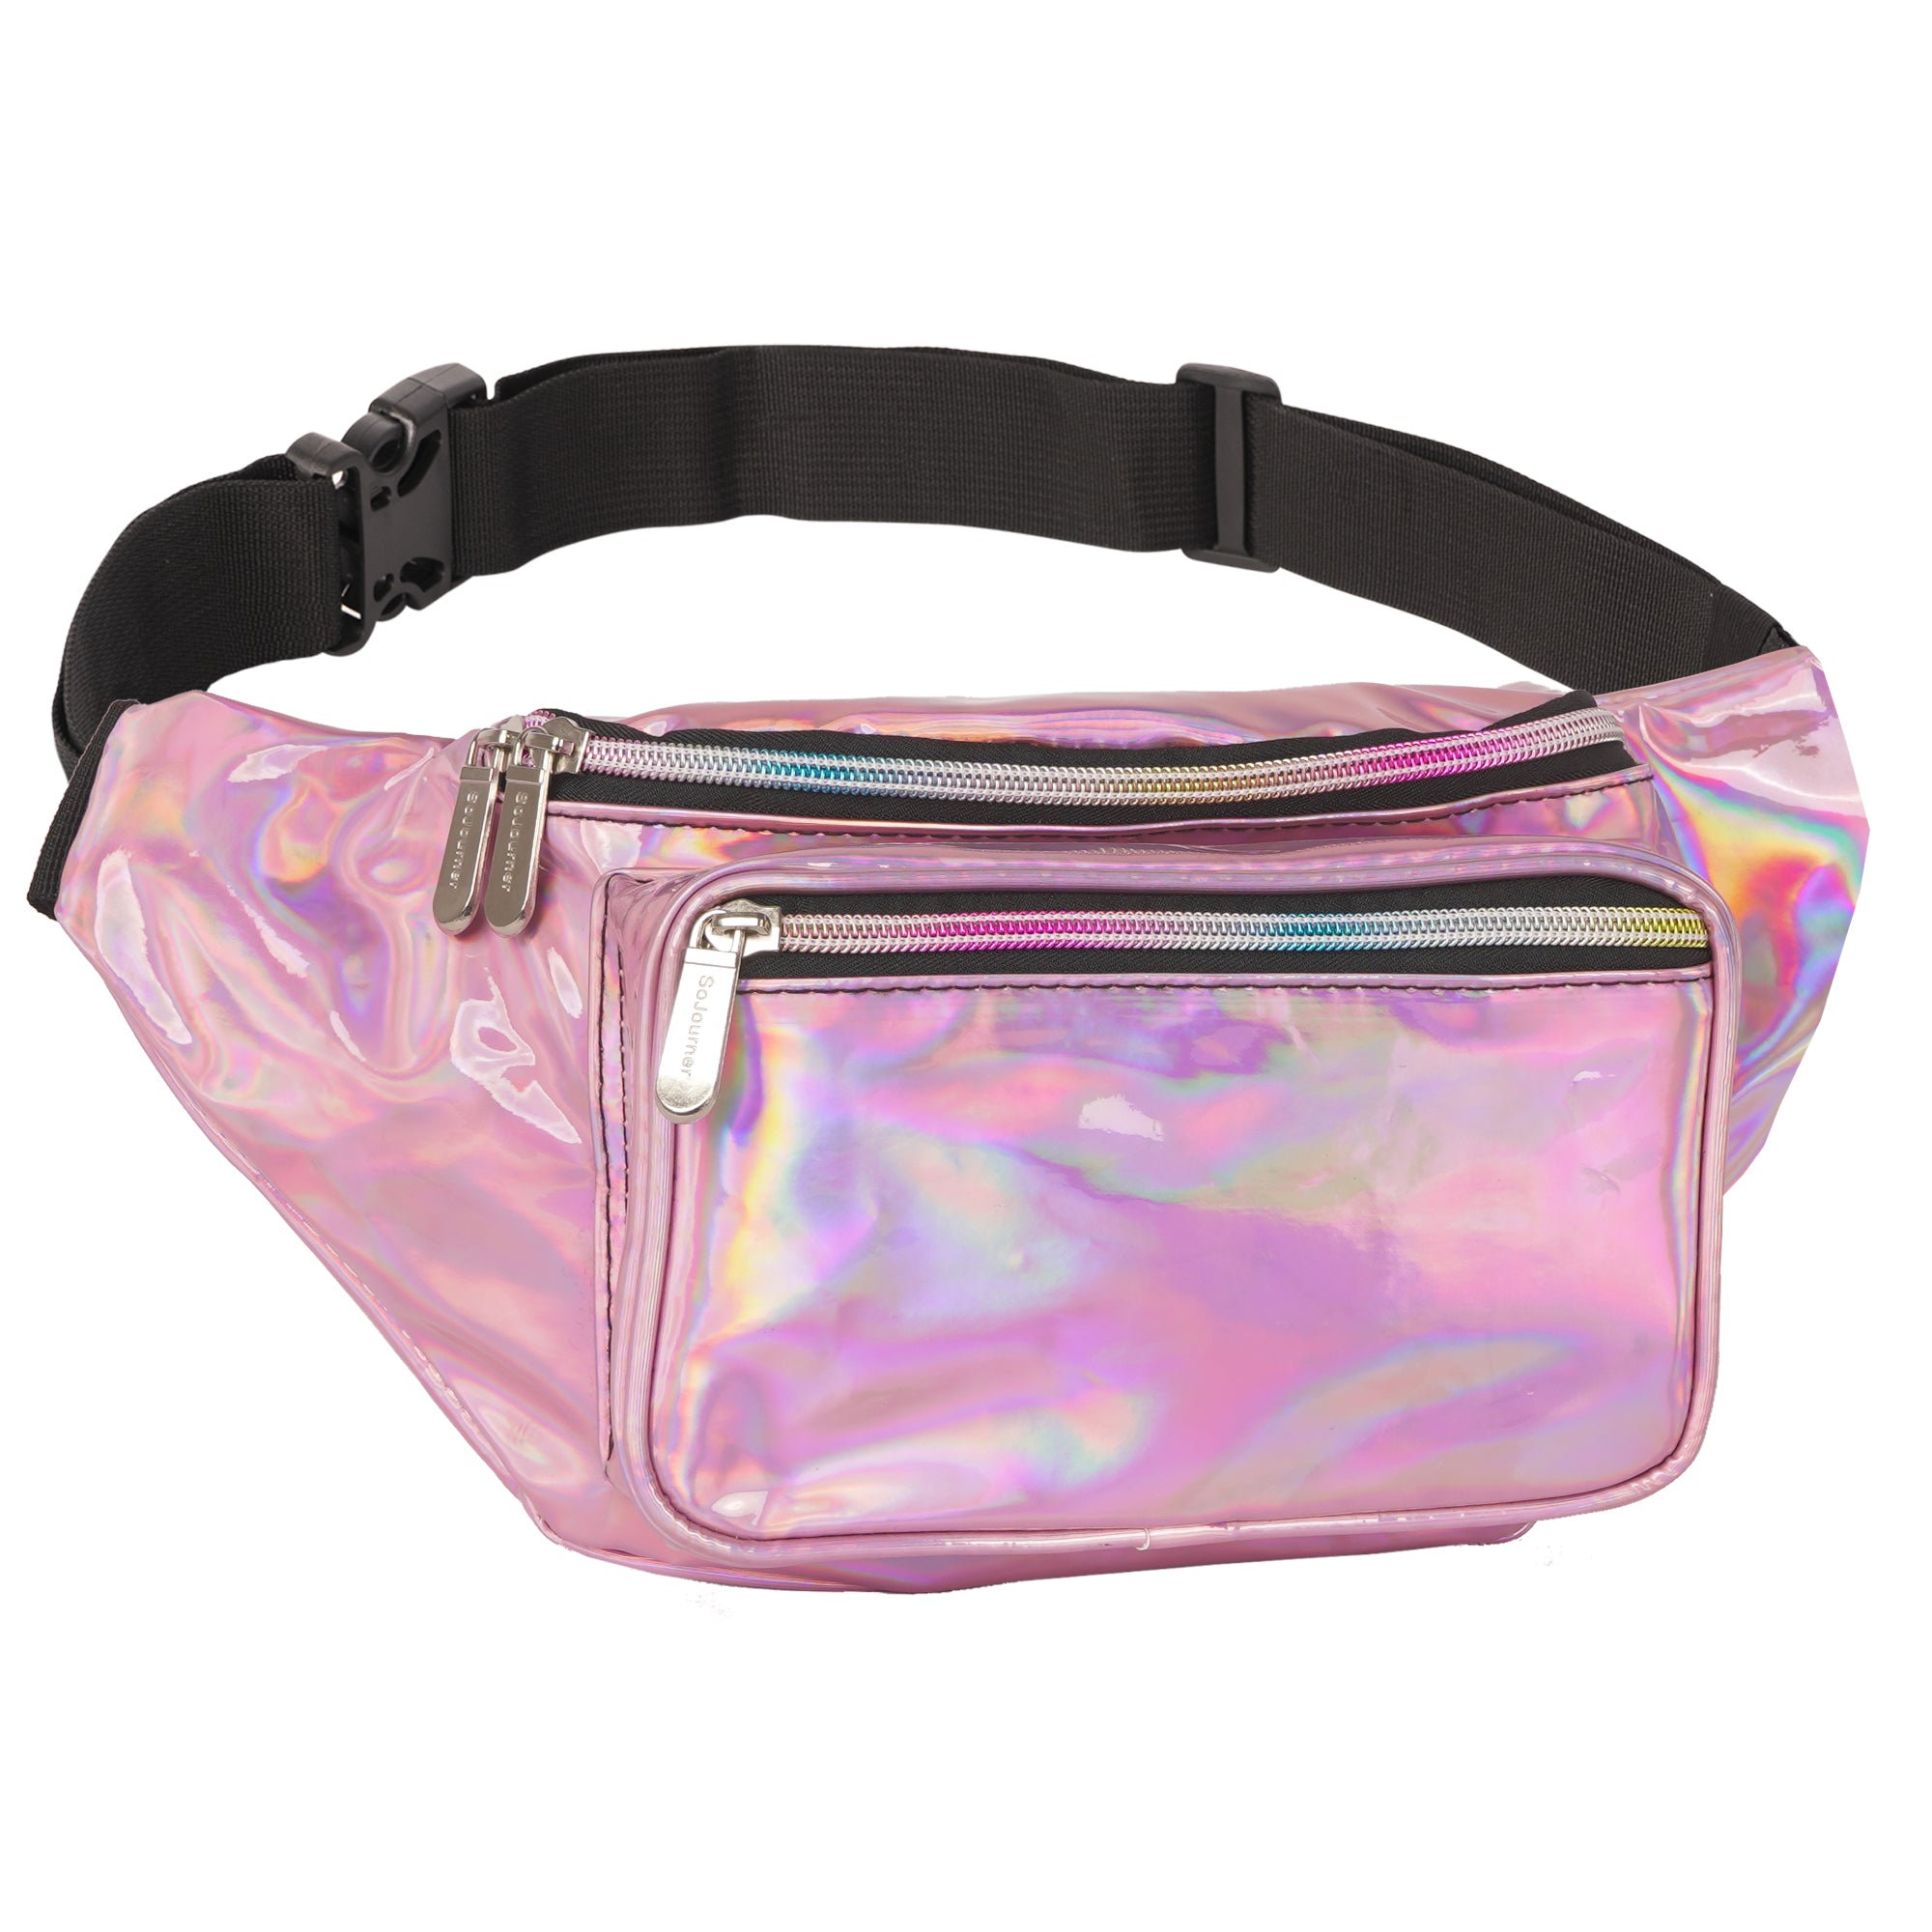 Holographic Pink Fanny Pack | SoJourner Bags